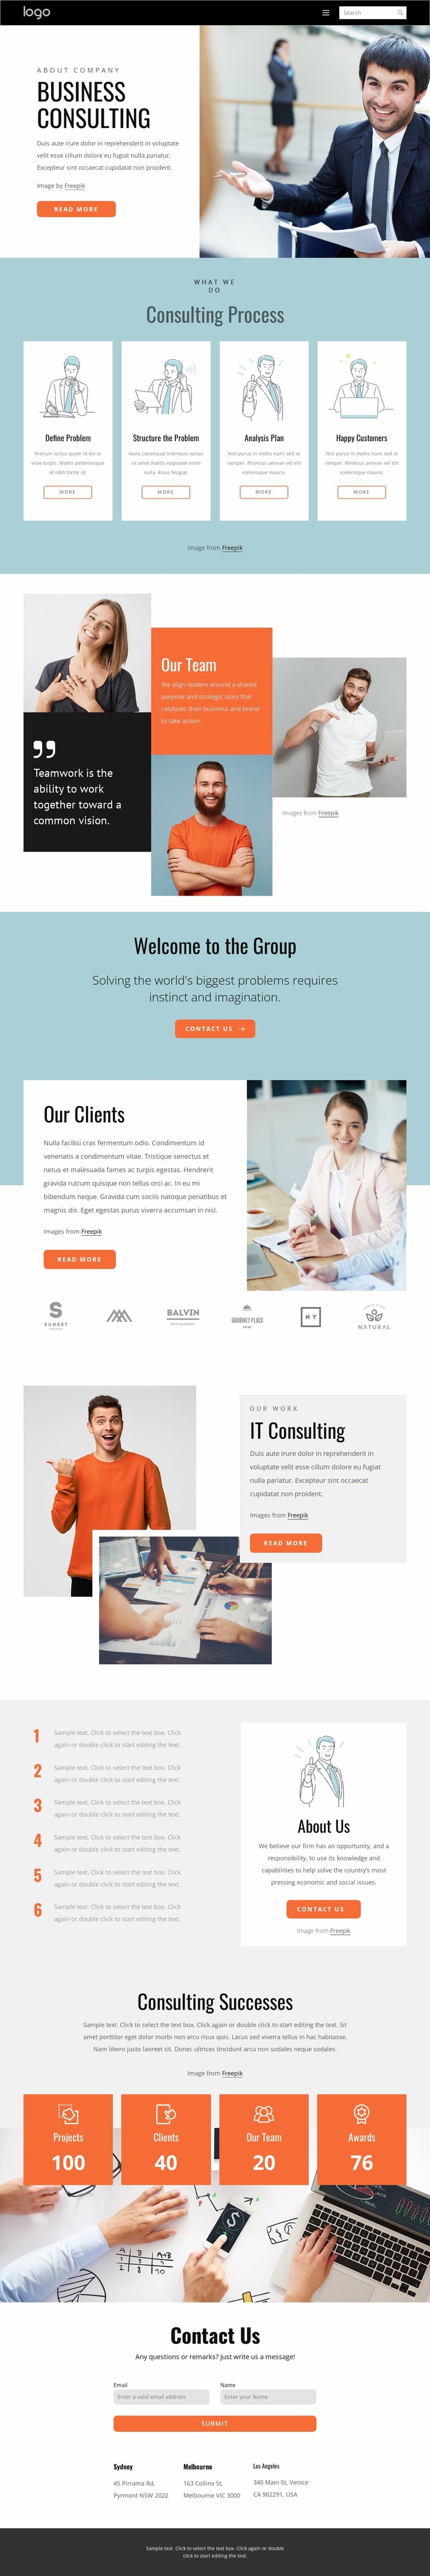 Consulting group Website Mockup